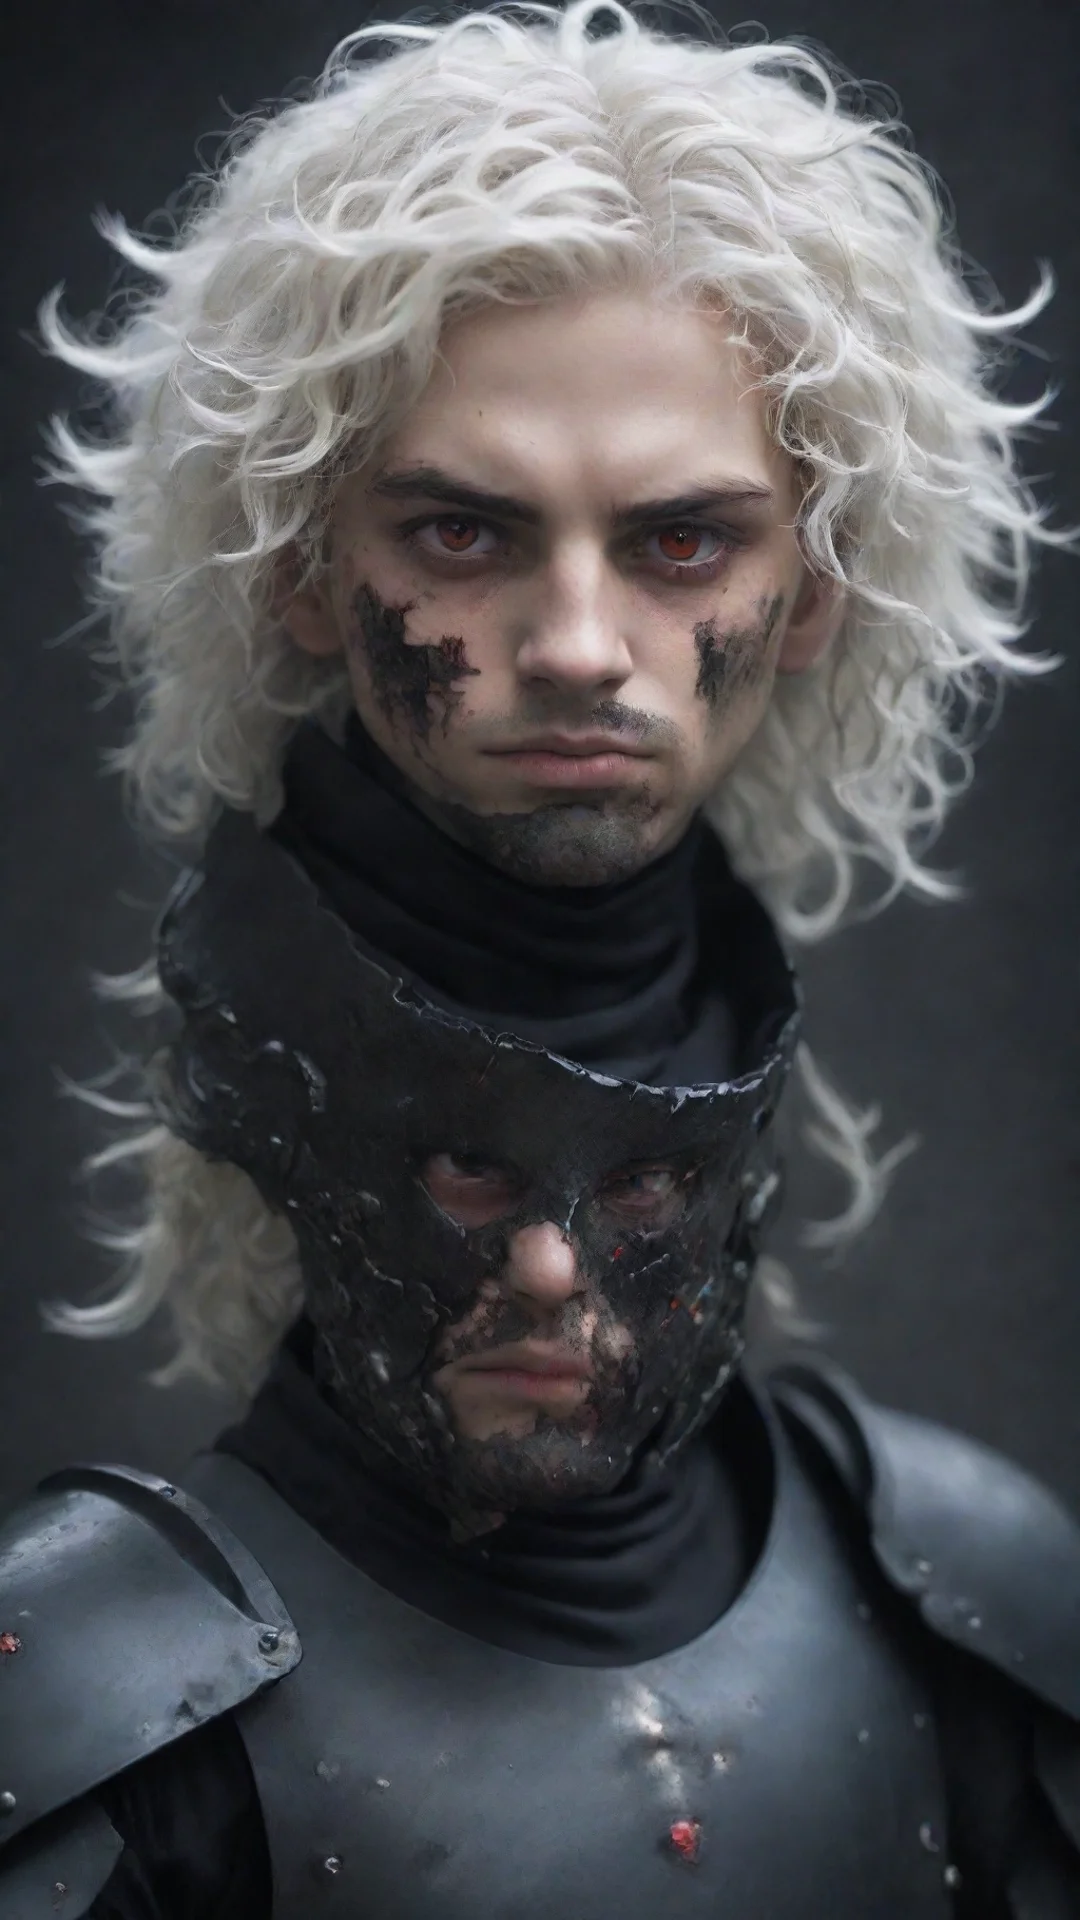 artstation art a young man%252c with fully black armor%252c he has a pale and melancholic face with scars on his face%252c he has short curly white hair and red eyes amazing awesome portrait 2 confi